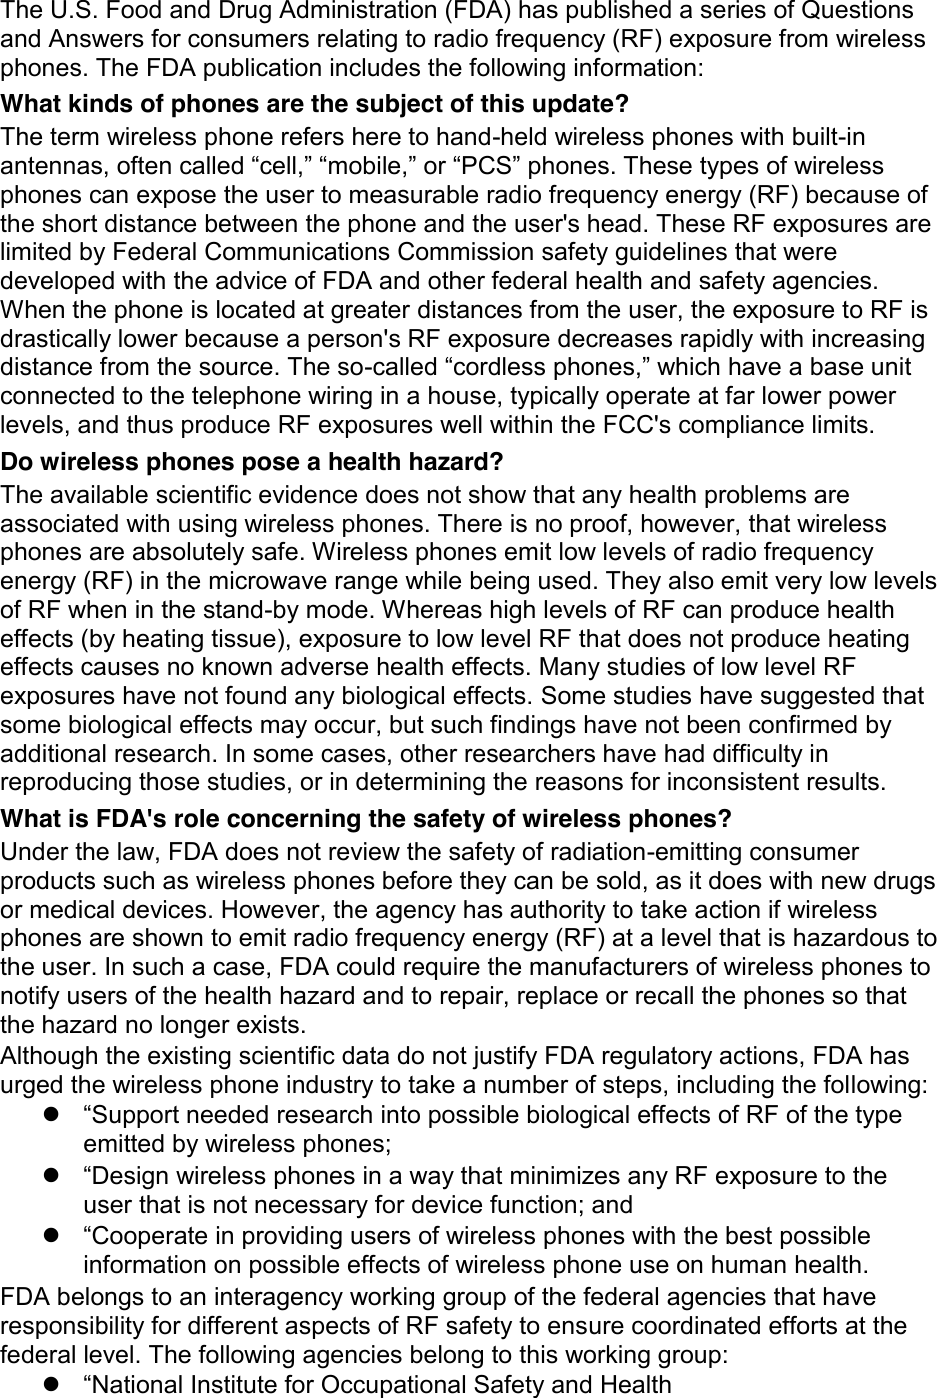 The U.S. Food and Drug Administration (FDA) has published a series of Questions and Answers for consumers relating to radio frequency (RF) exposure from wireless phones. The FDA publication includes the following information: What kinds of phones are the subject of this update? The term wireless phone refers here to hand-held wireless phones with built-in antennas,oftencalled“cell,”“mobile,”or“PCS”phones.Thesetypesofwirelessphones can expose the user to measurable radio frequency energy (RF) because of the short distance between the phone and the user&apos;s head. These RF exposures are limited by Federal Communications Commission safety guidelines that were developed with the advice of FDA and other federal health and safety agencies. When the phone is located at greater distances from the user, the exposure to RF is drastically lower because a person&apos;s RF exposure decreases rapidly with increasing distance from the source. The so-called“cordlessphones,”whichhaveabaseunitconnected to the telephone wiring in a house, typically operate at far lower power levels, and thus produce RF exposures well within the FCC&apos;s compliance limits. Do wireless phones pose a health hazard? The available scientific evidence does not show that any health problems are associated with using wireless phones. There is no proof, however, that wireless phones are absolutely safe. Wireless phones emit low levels of radio frequency energy (RF) in the microwave range while being used. They also emit very low levels of RF when in the stand-by mode. Whereas high levels of RF can produce health effects (by heating tissue), exposure to low level RF that does not produce heating effects causes no known adverse health effects. Many studies of low level RF exposures have not found any biological effects. Some studies have suggested that some biological effects may occur, but such findings have not been confirmed by additional research. In some cases, other researchers have had difficulty in reproducing those studies, or in determining the reasons for inconsistent results. What is FDA&apos;s role concerning the safety of wireless phones? Under the law, FDA does not review the safety of radiation-emitting consumer products such as wireless phones before they can be sold, as it does with new drugs or medical devices. However, the agency has authority to take action if wireless phones are shown to emit radio frequency energy (RF) at a level that is hazardous to the user. In such a case, FDA could require the manufacturers of wireless phones to notify users of the health hazard and to repair, replace or recall the phones so that the hazard no longer exists. Although the existing scientific data do not justify FDA regulatory actions, FDA has urged the wireless phone industry to take a number of steps, including the following:  “SupportneededresearchintopossiblebiologicaleffectsofRFofthetypeemitted by wireless phones;  “DesignwirelessphonesinawaythatminimizesanyRFexposuretotheuser that is not necessary for device function; and  “Cooperateinproviding users of wireless phones with the best possible information on possible effects of wireless phone use on human health. FDA belongs to an interagency working group of the federal agencies that have responsibility for different aspects of RF safety to ensure coordinated efforts at the federal level. The following agencies belong to this working group:  “NationalInstituteforOccupationalSafetyandHealth 